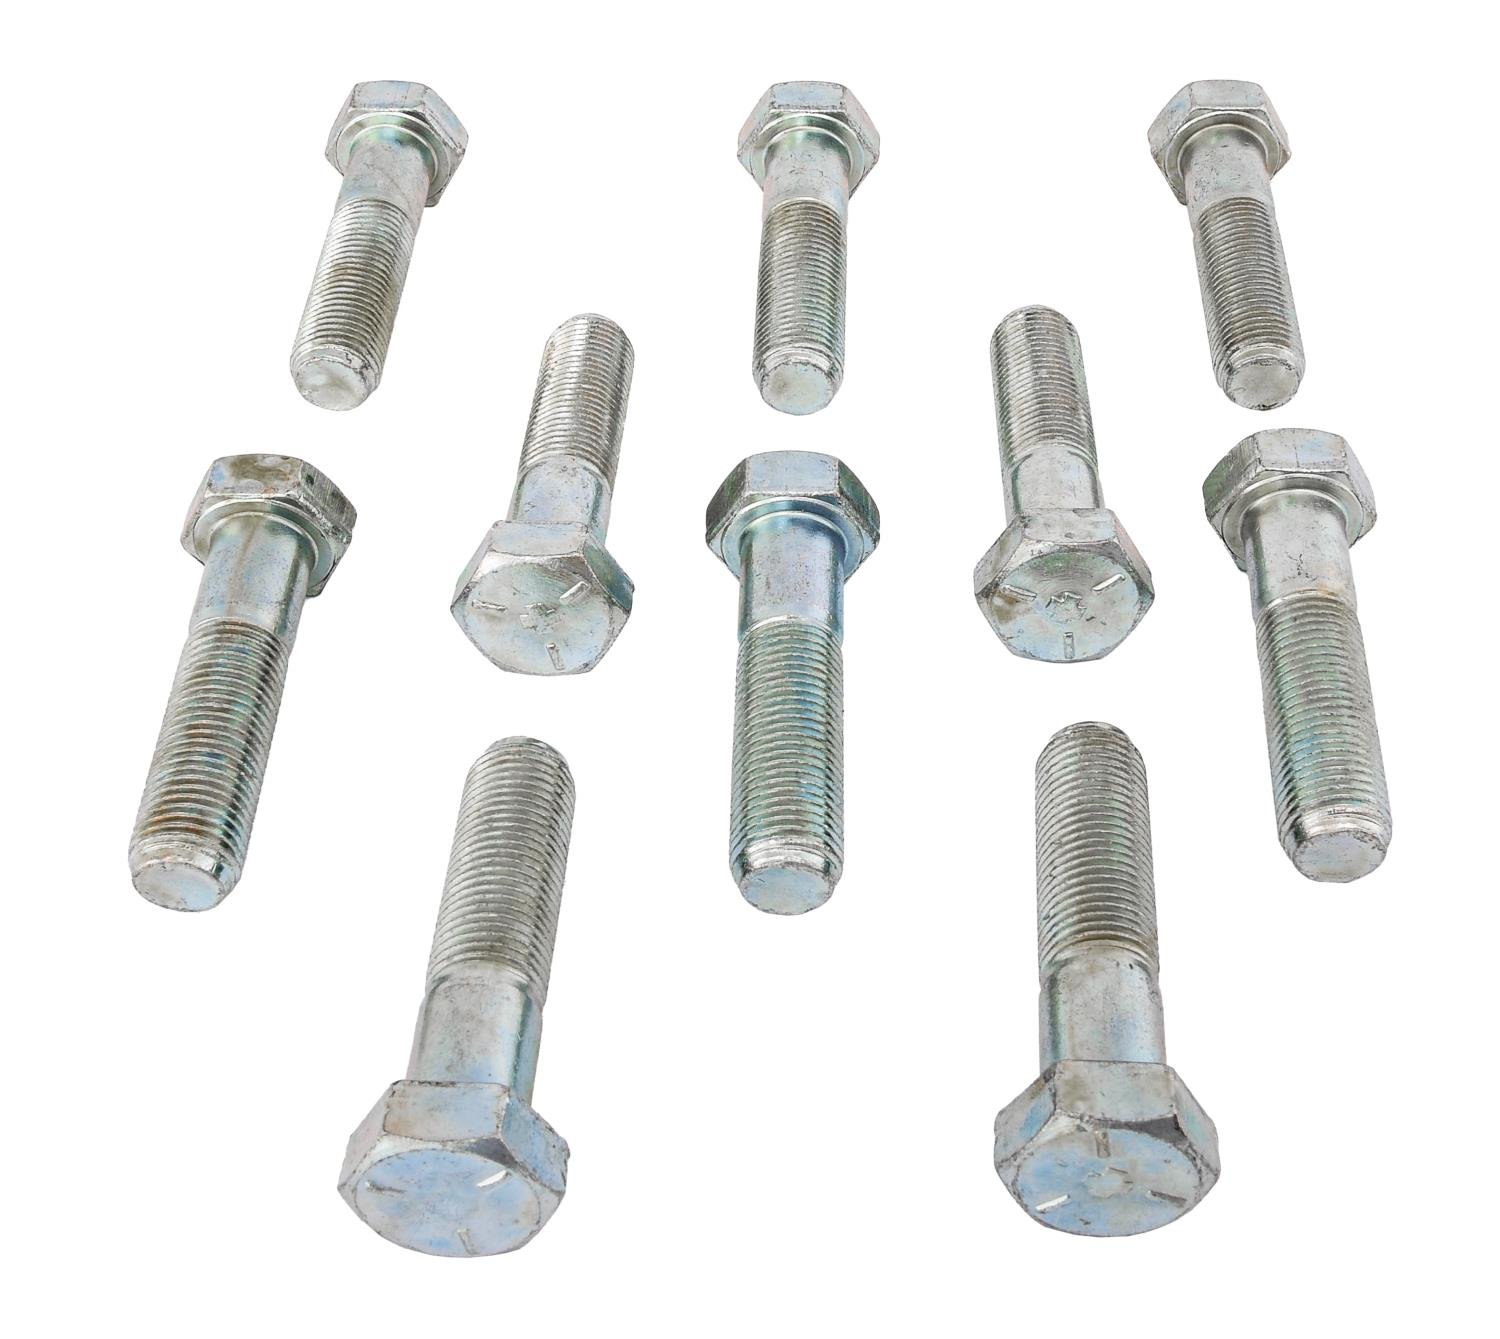 Hex Head Bolts, 1/2 in.-20 x 2 in. UHL, Carbon Steel, Grade 5 [Set of 10]